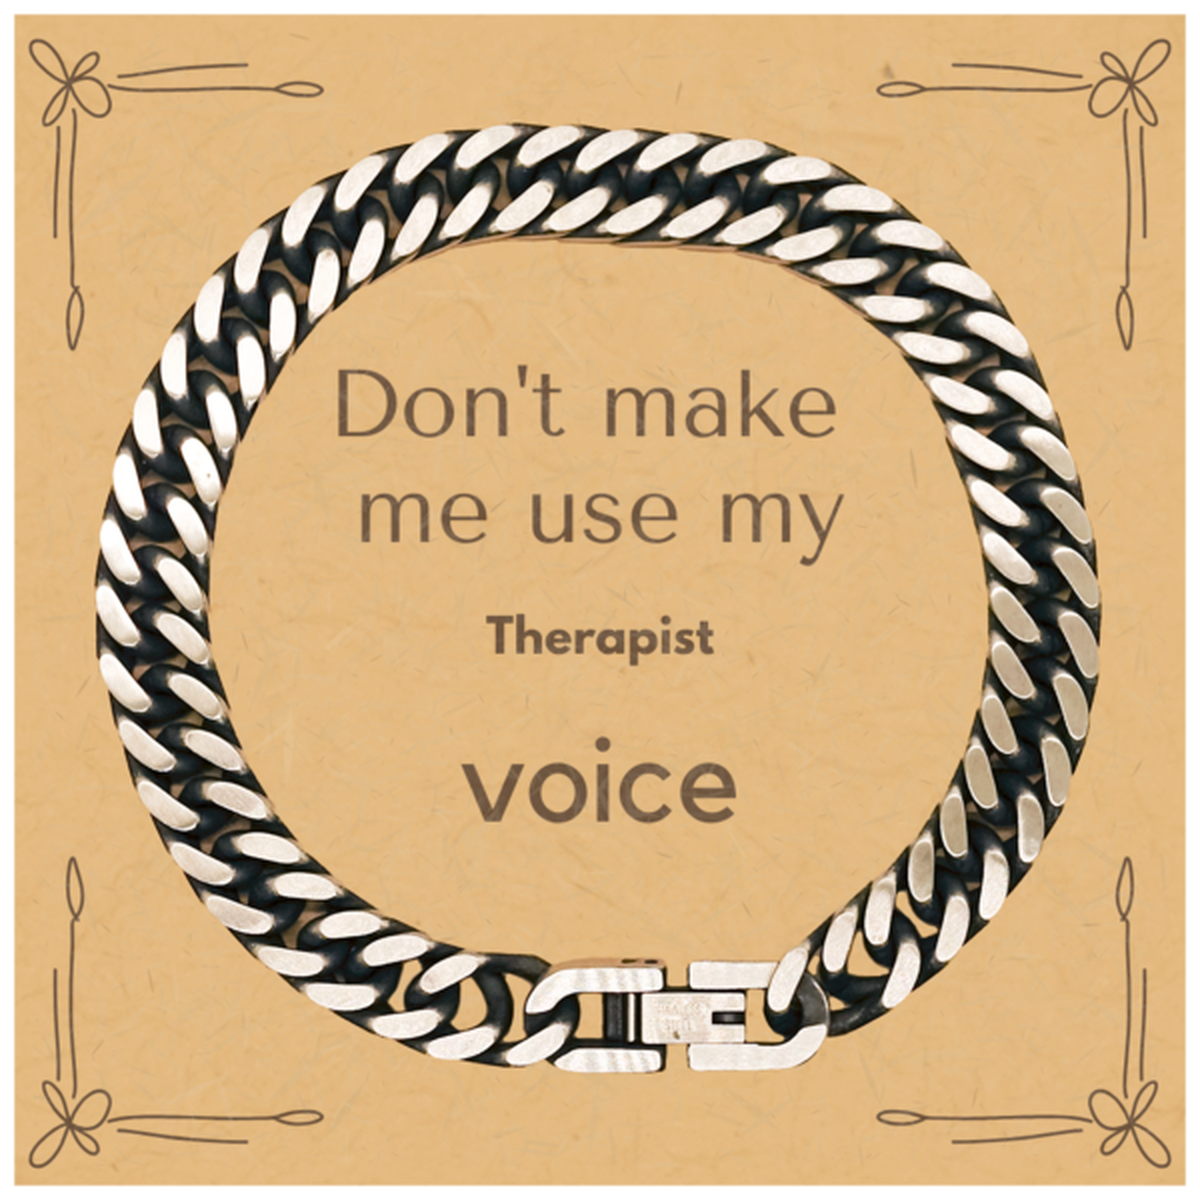 Don't make me use my Therapist voice, Sarcasm Therapist Card Gifts, Christmas Therapist Cuban Link Chain Bracelet Birthday Unique Gifts For Therapist Coworkers, Men, Women, Colleague, Friends